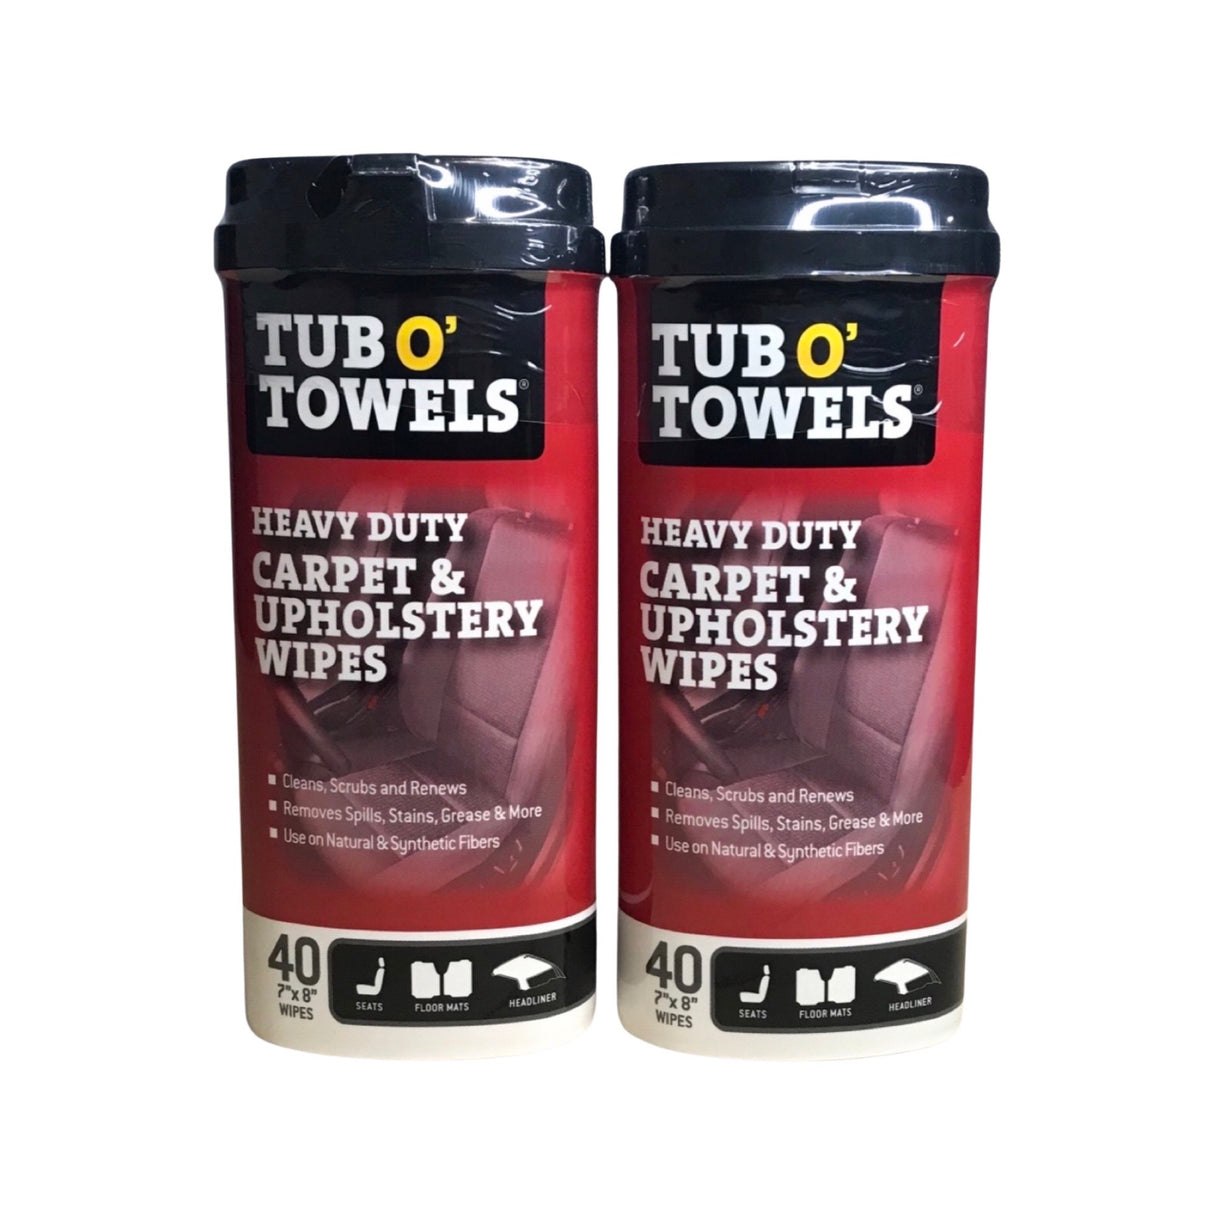 Tub O' Towels TW40-CPA - 2 Pack Heavy Duty Carpet & Upholstery Automotive Wipes